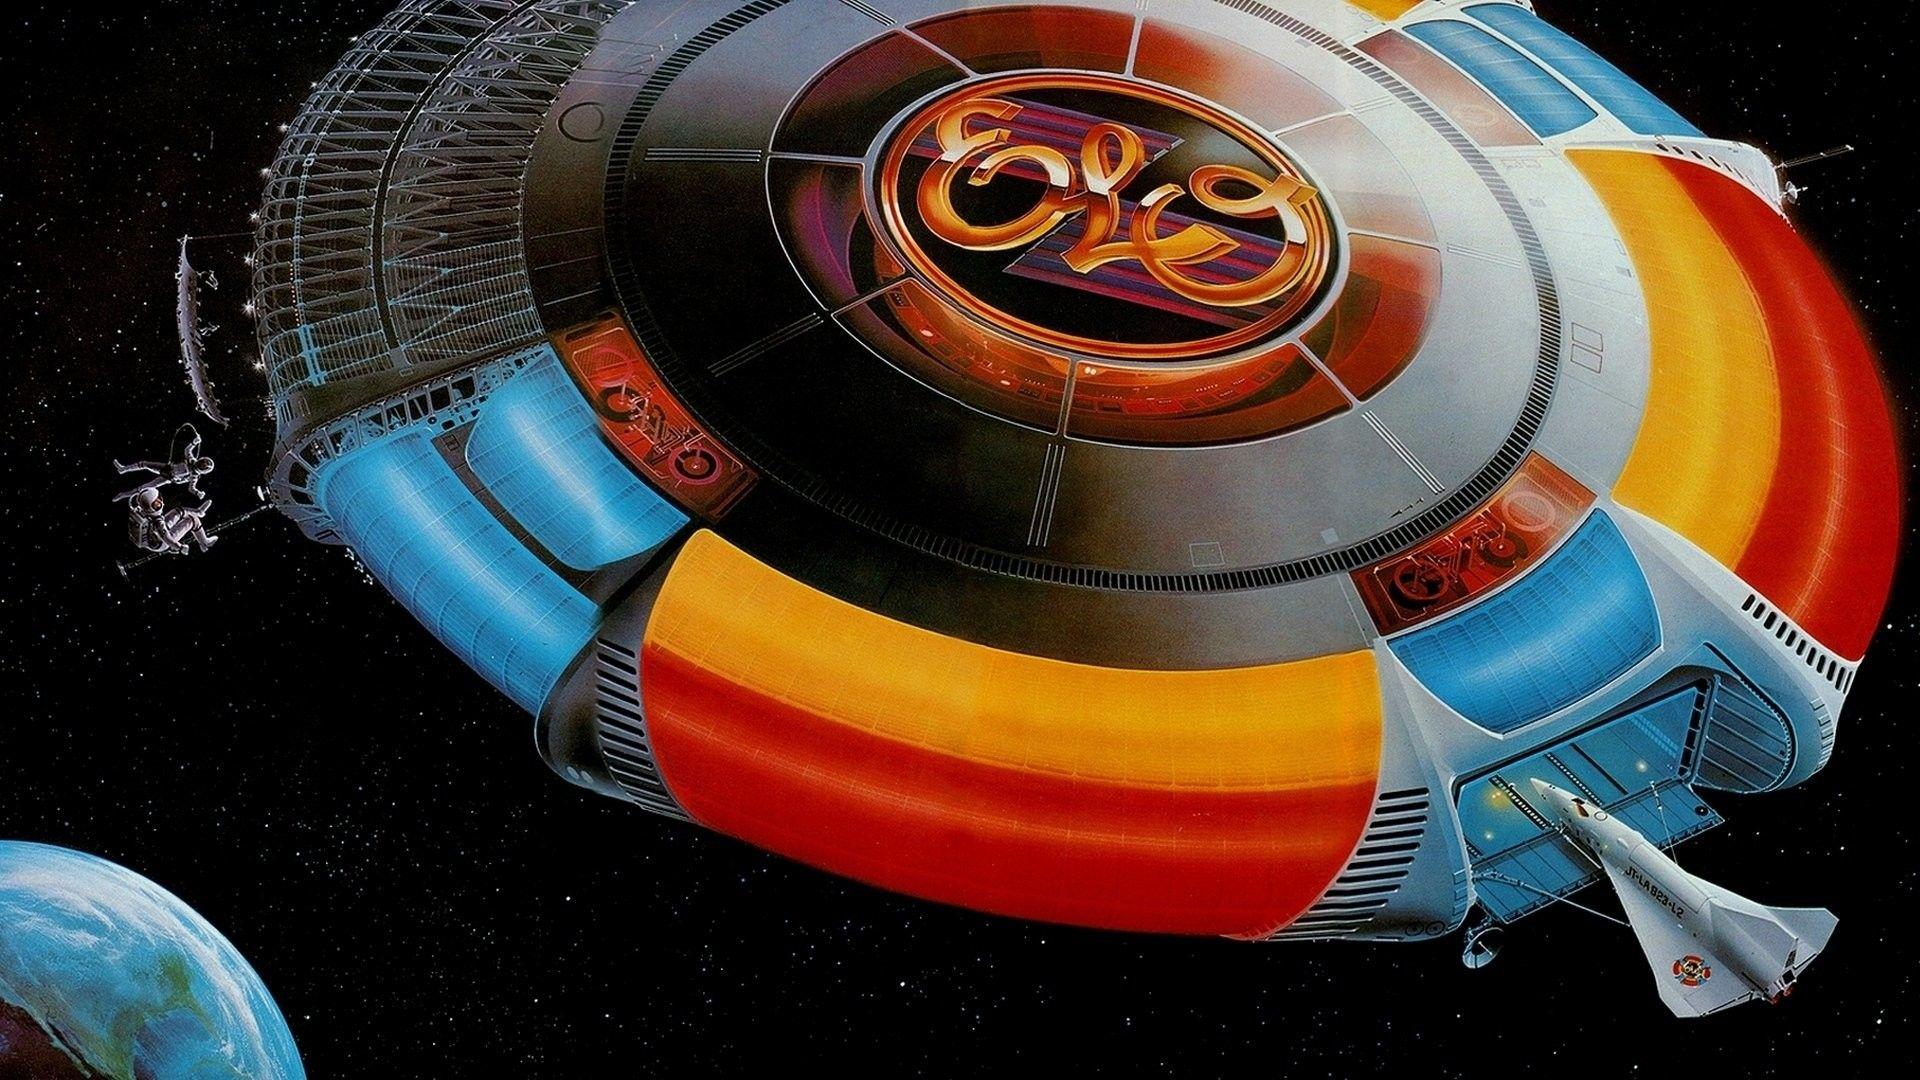 Electric Light Orchestra Wallpaper